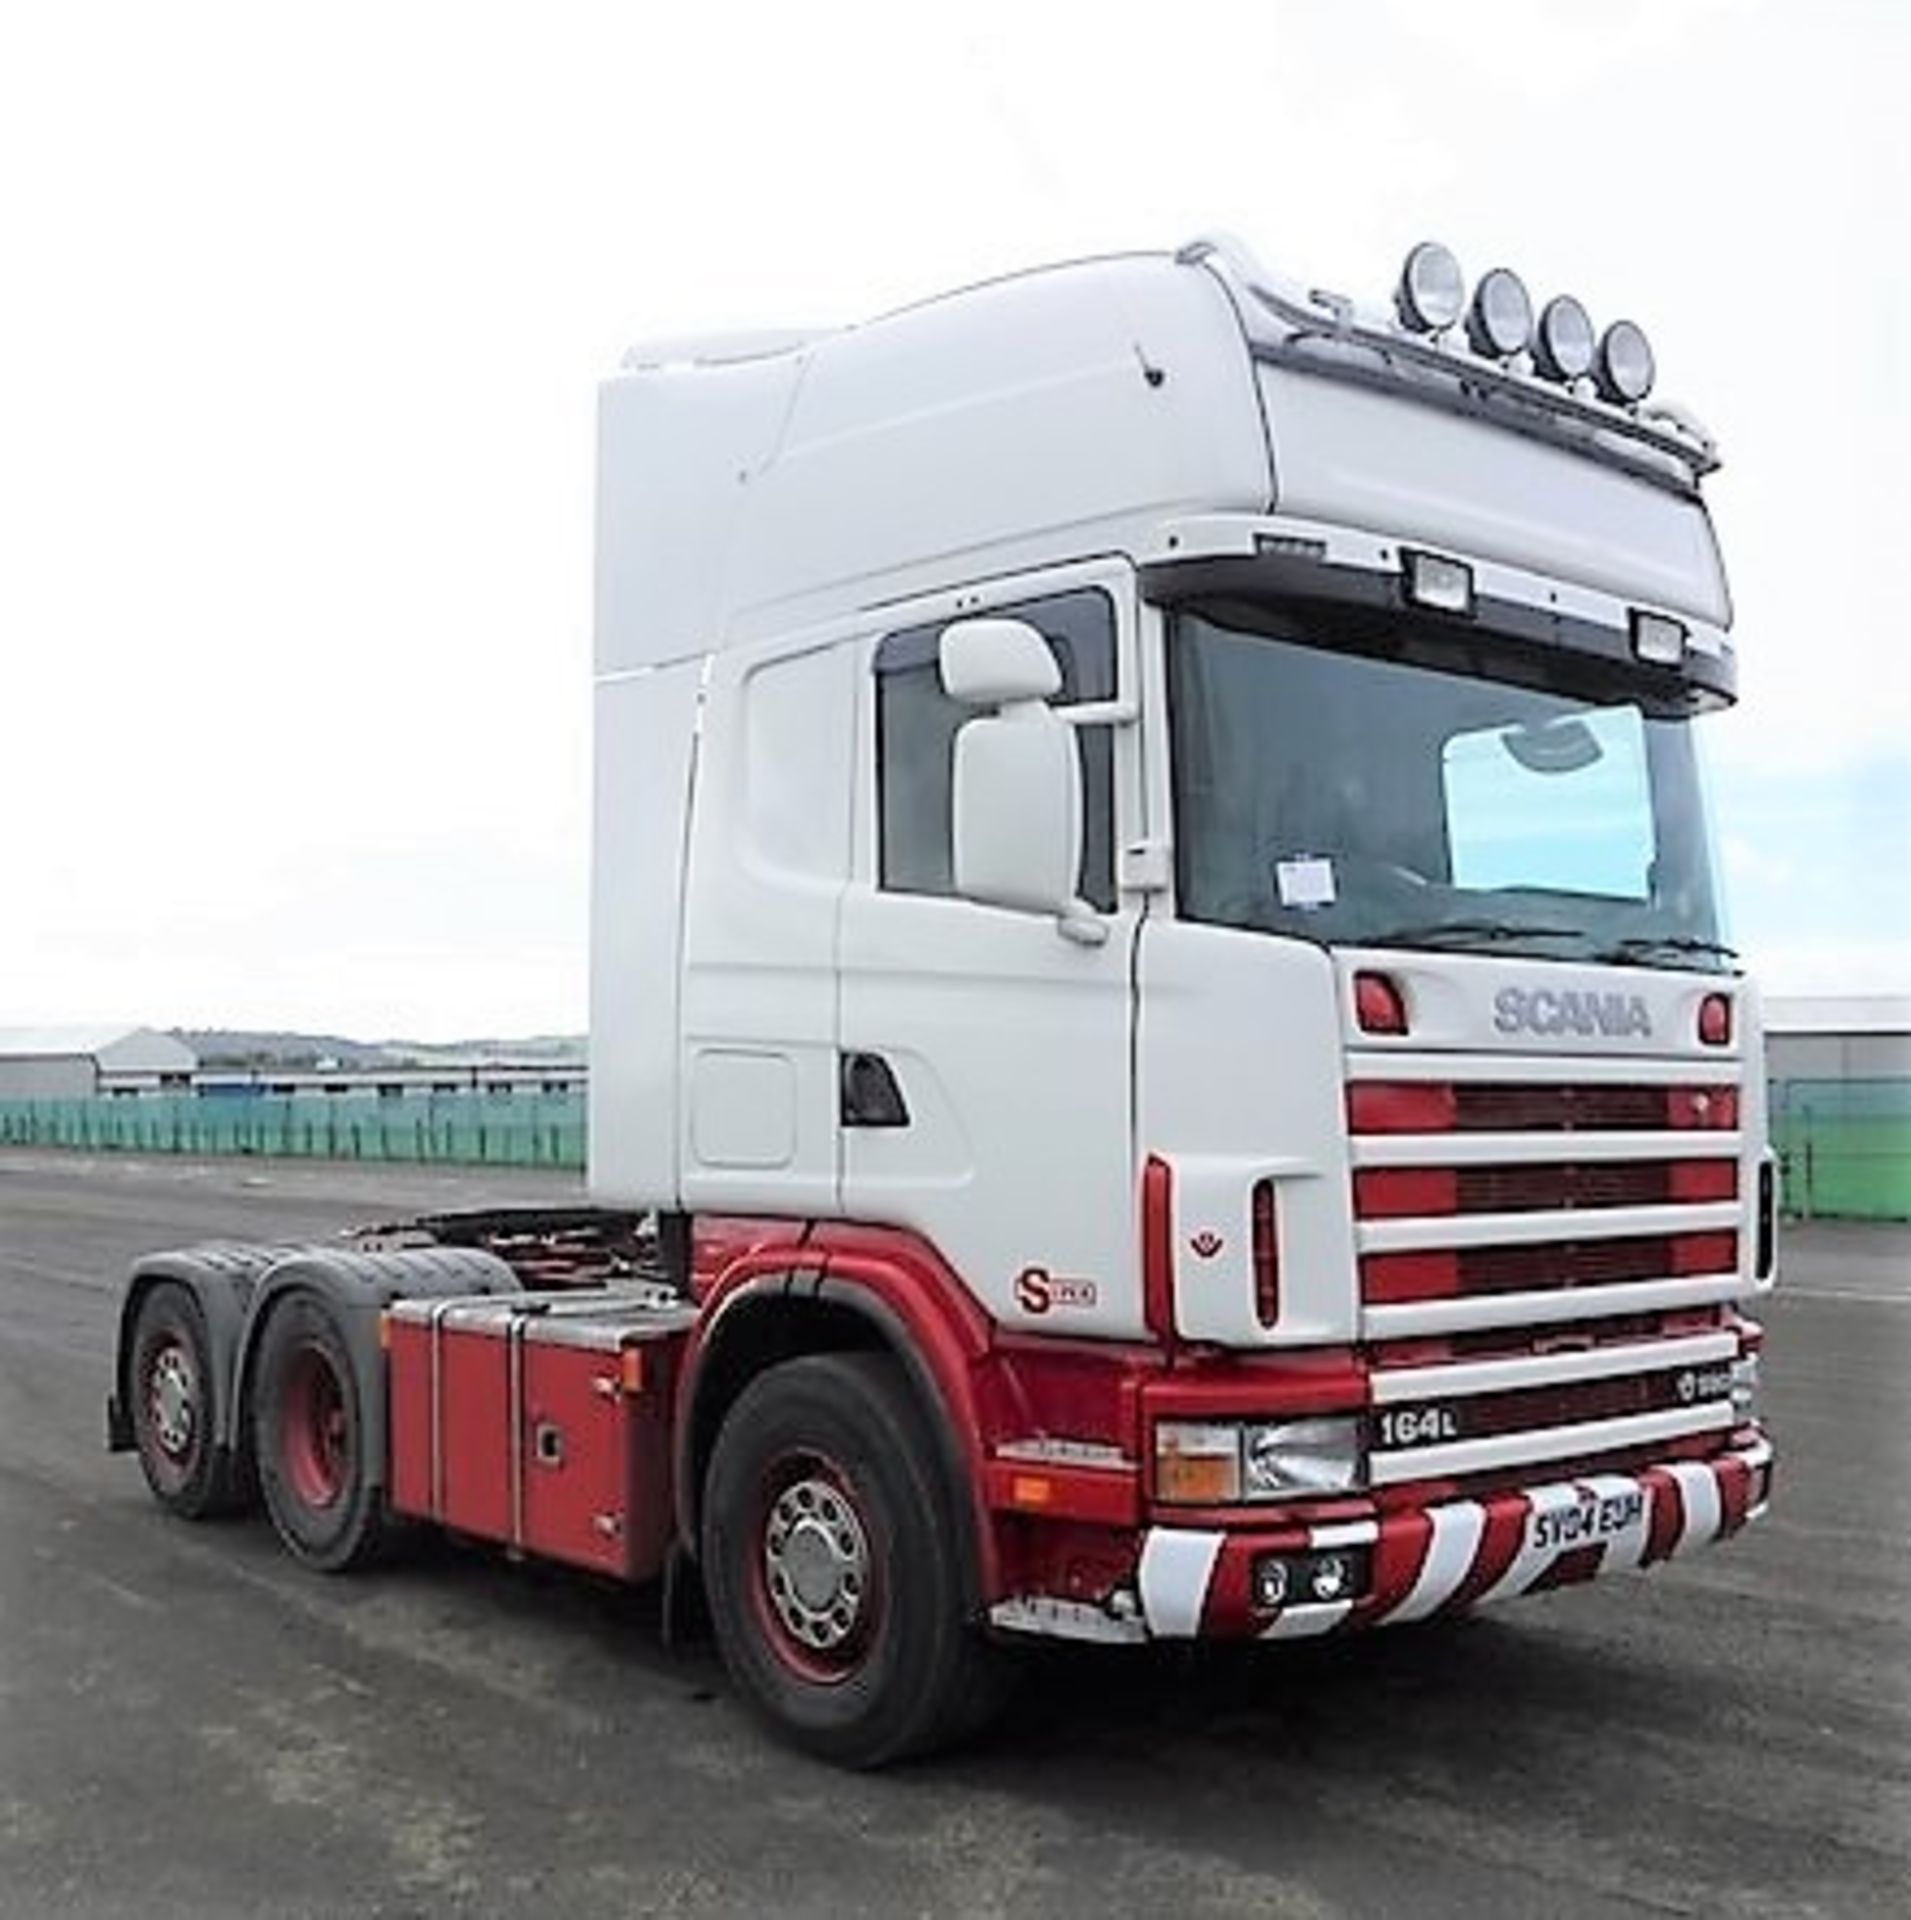 SCANIA 4 SRS L-CLASS - 15607cc - Image 10 of 20